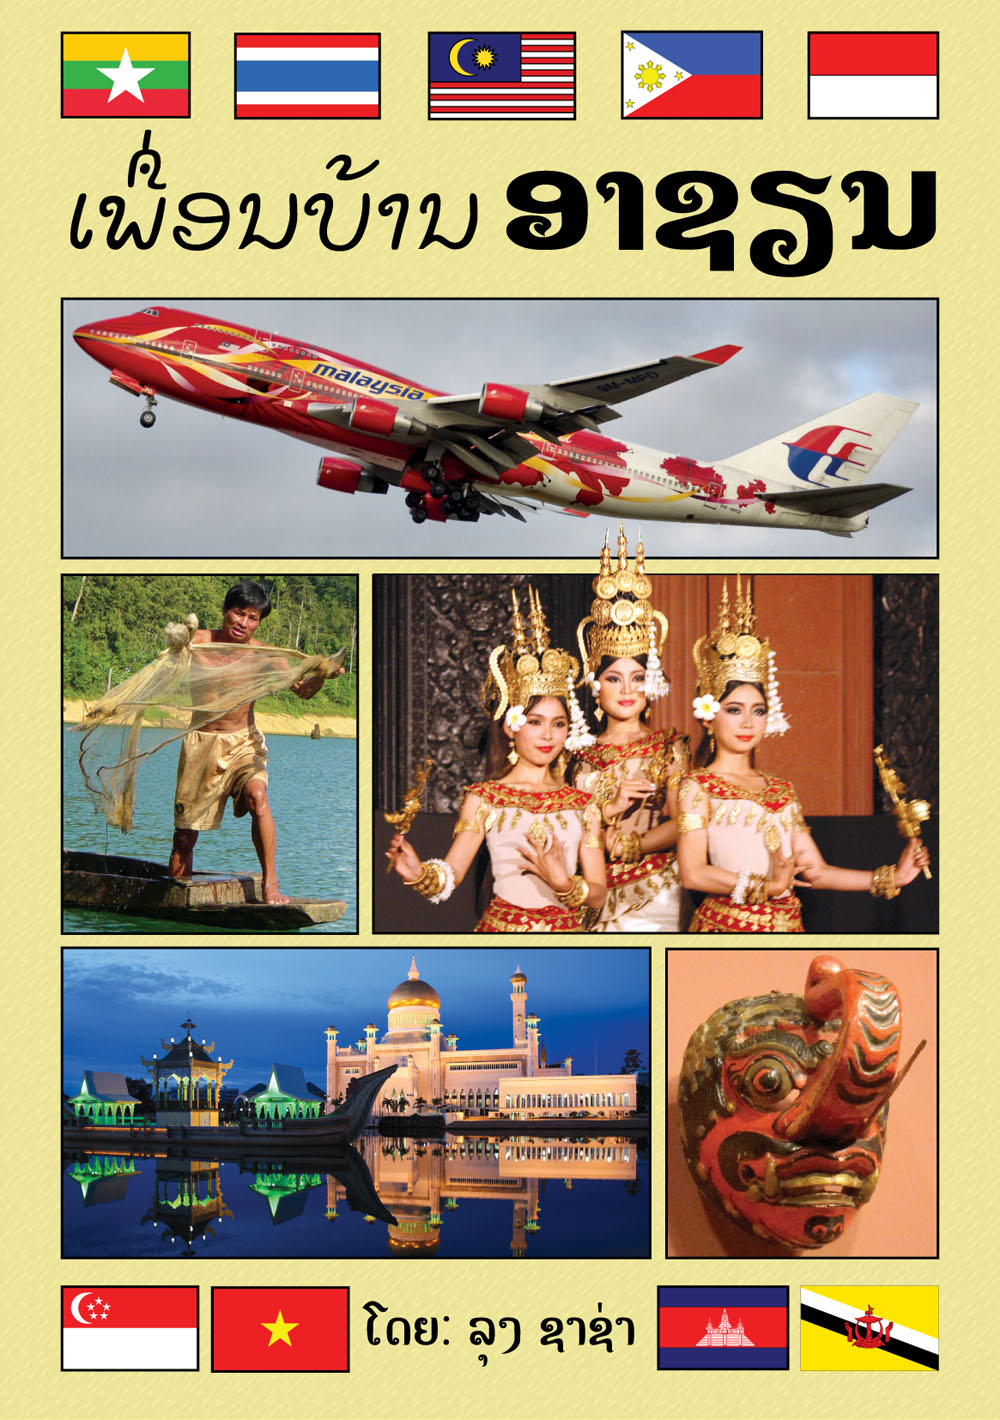 Our ASEAN Neighbors large book cover, published in Lao language